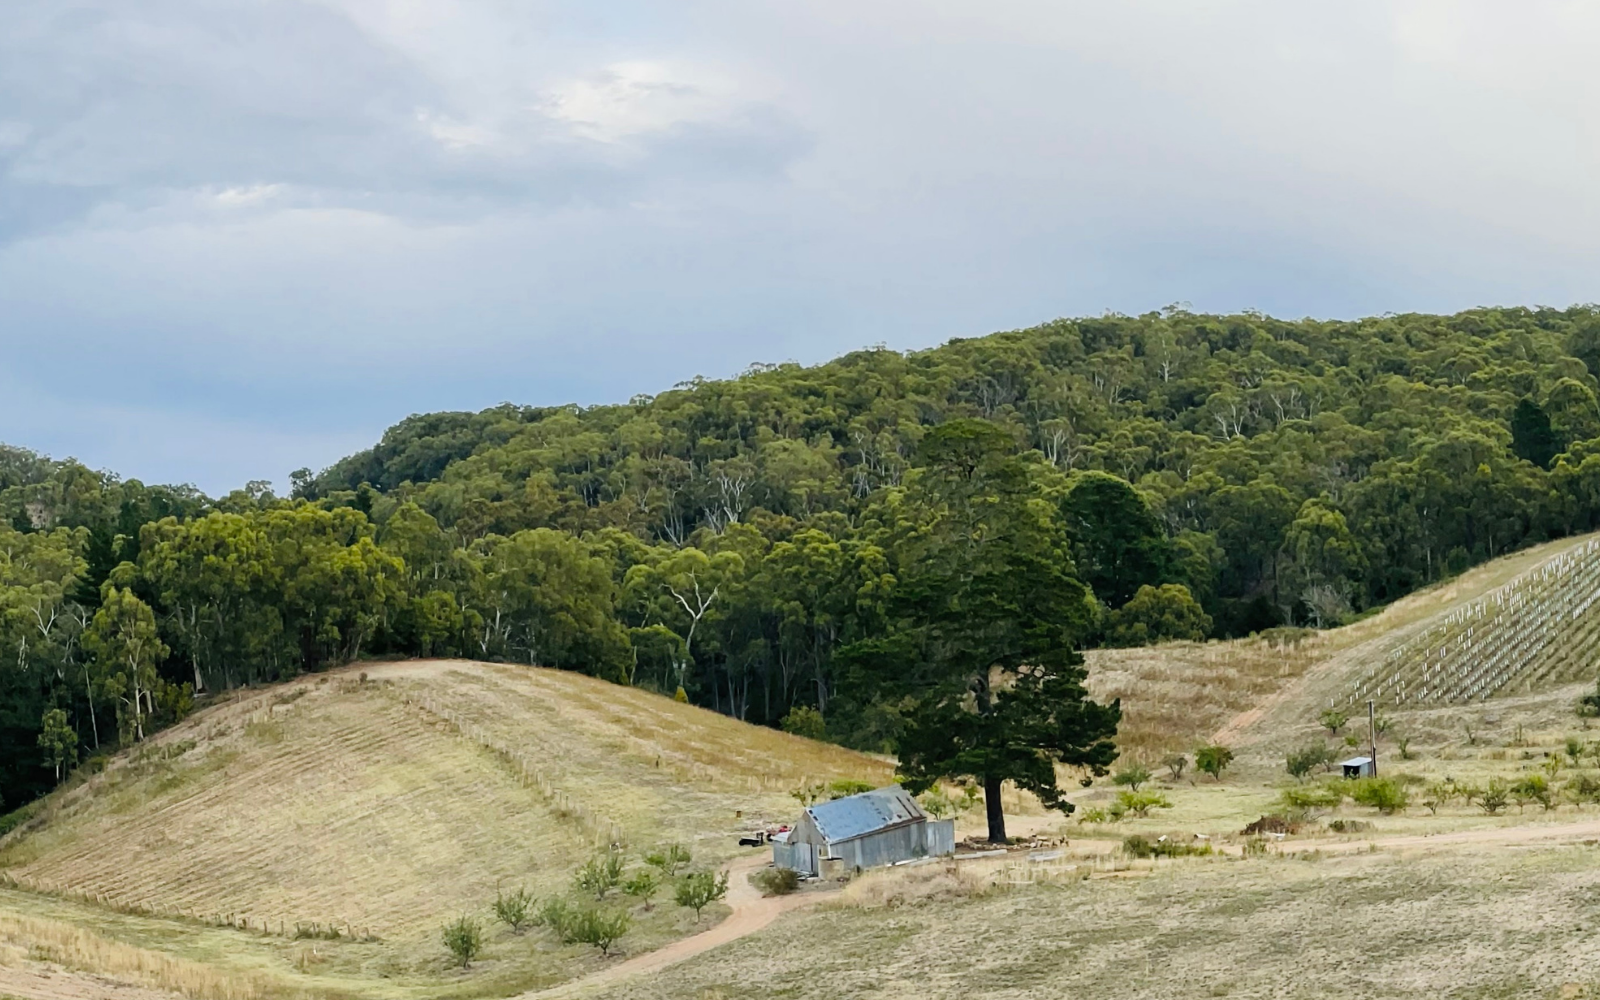 Rolling hills with vineyard in foreground and stringy bark forest in the background. Overlaid text Tagai Vineyards and Cellar Door, Lenswood South Australia